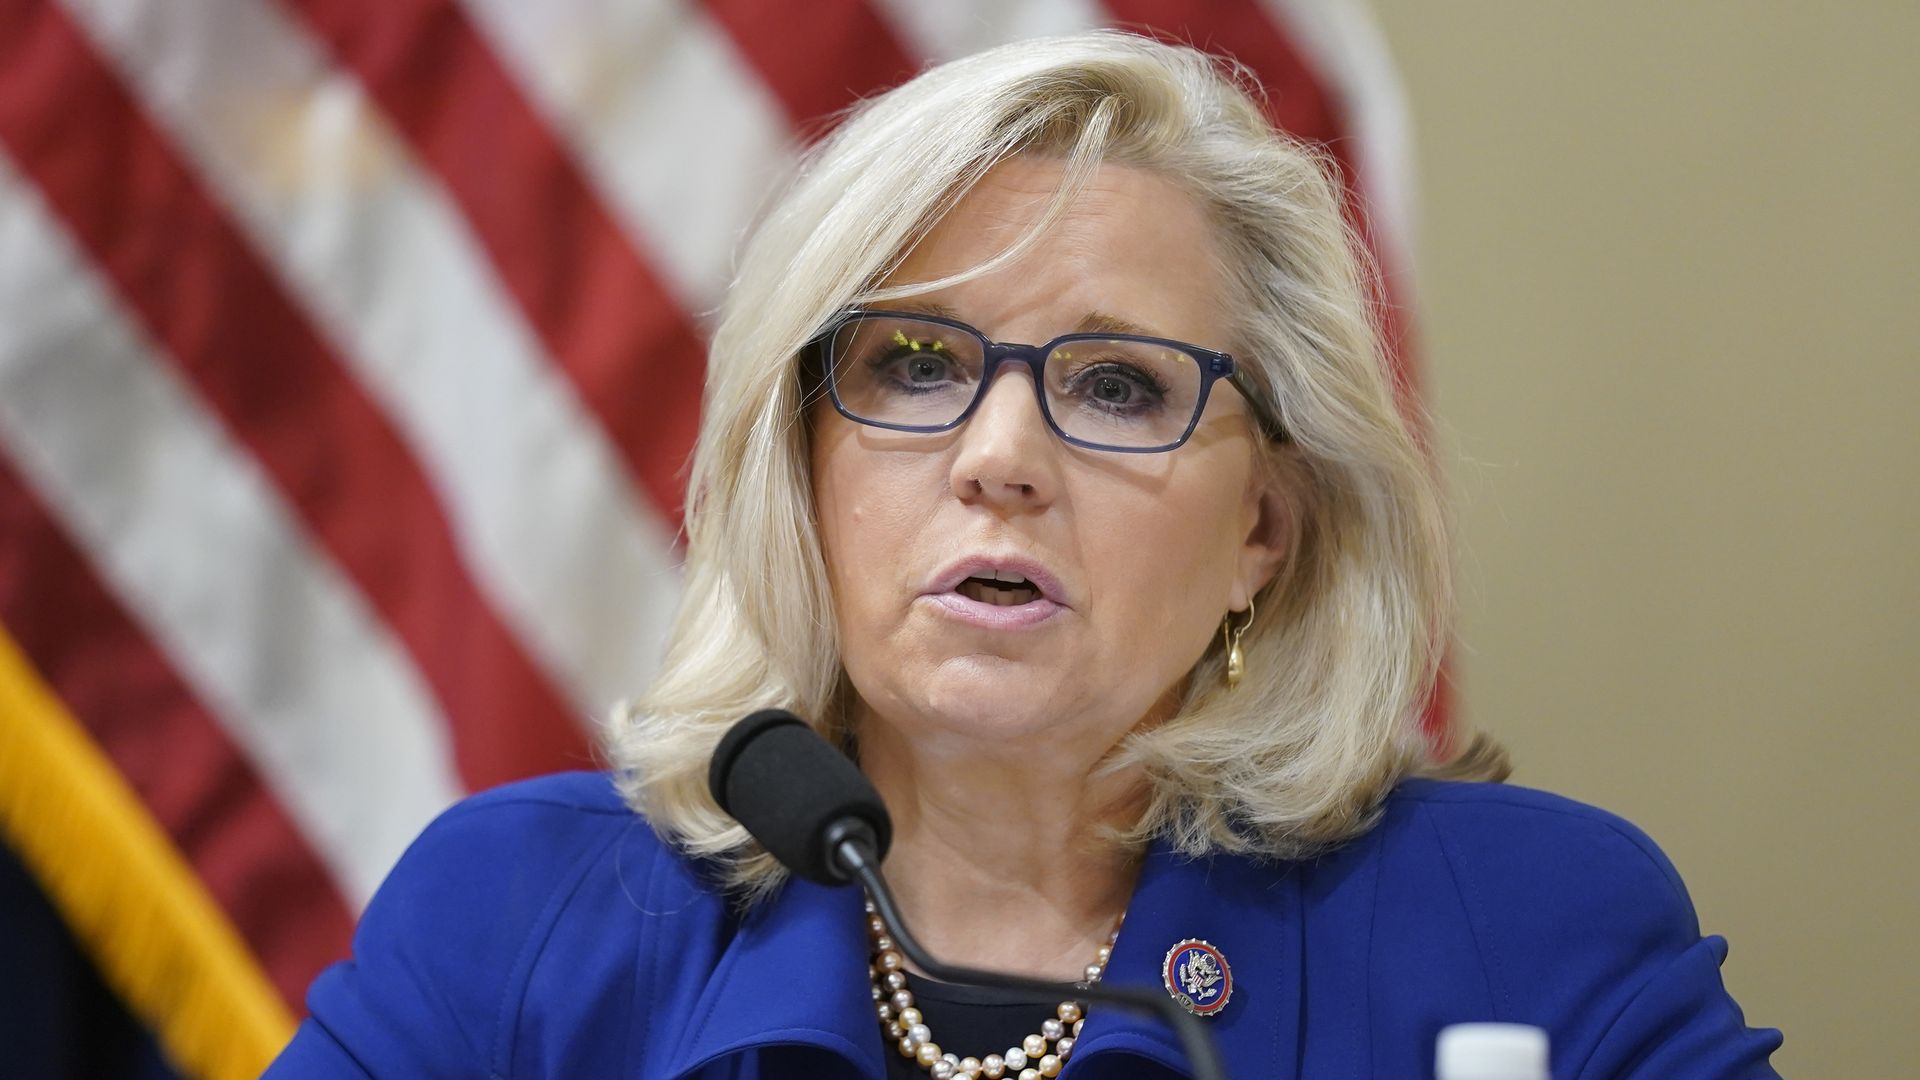 Representative Liz Cheney, a Republican from Wyoming, speaks during a hearing for the Select Committee to Investigate the January 6th Attack